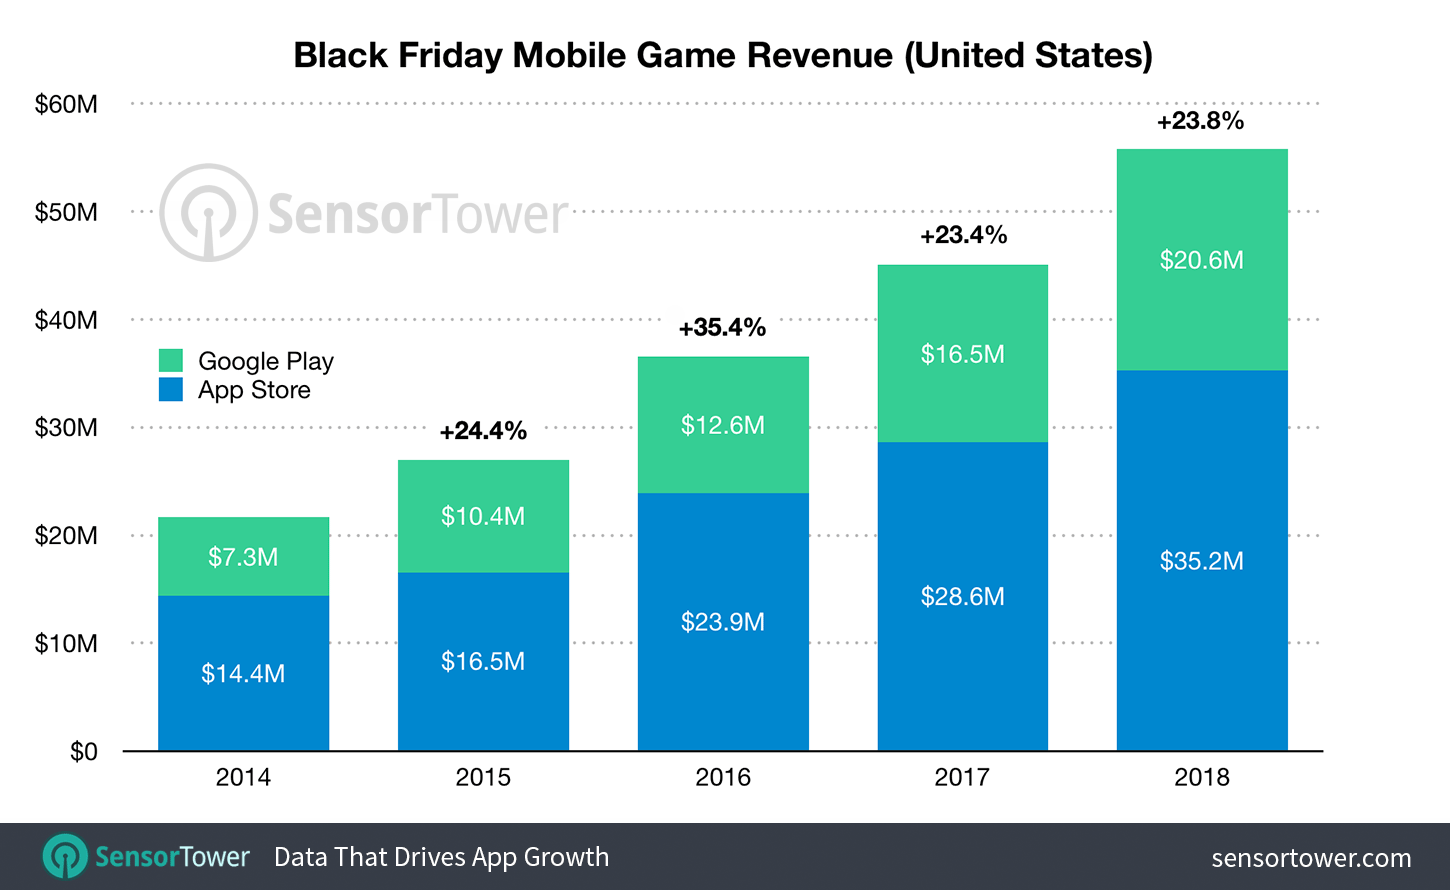 Historical Black Friday Revenue on the U.S. App Store and Google Play